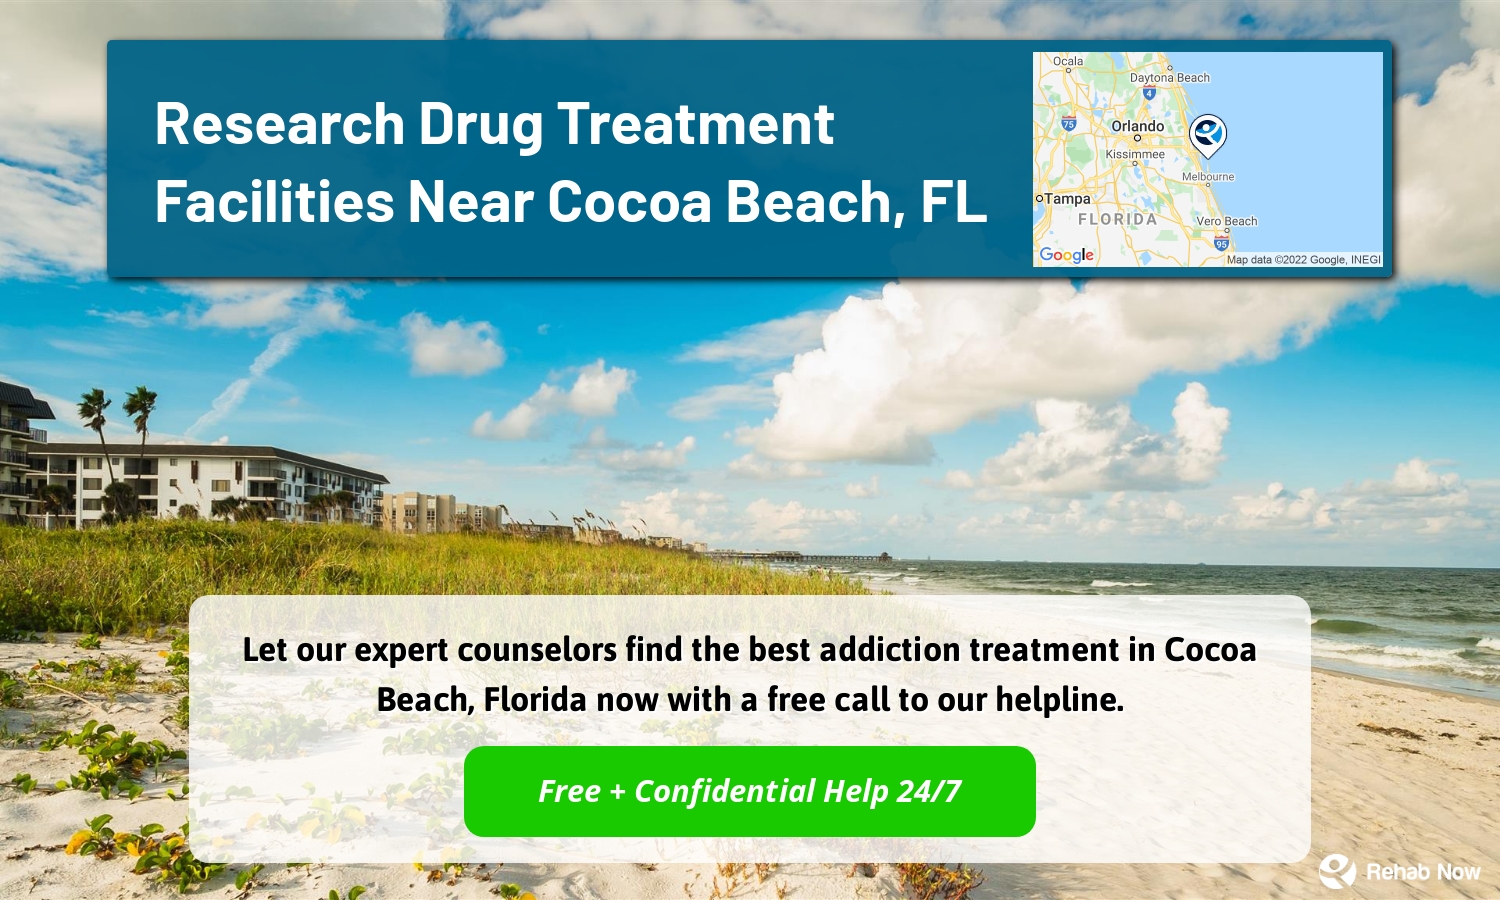 Let our expert counselors find the best addiction treatment in Cocoa Beach, Florida now with a free call to our helpline.